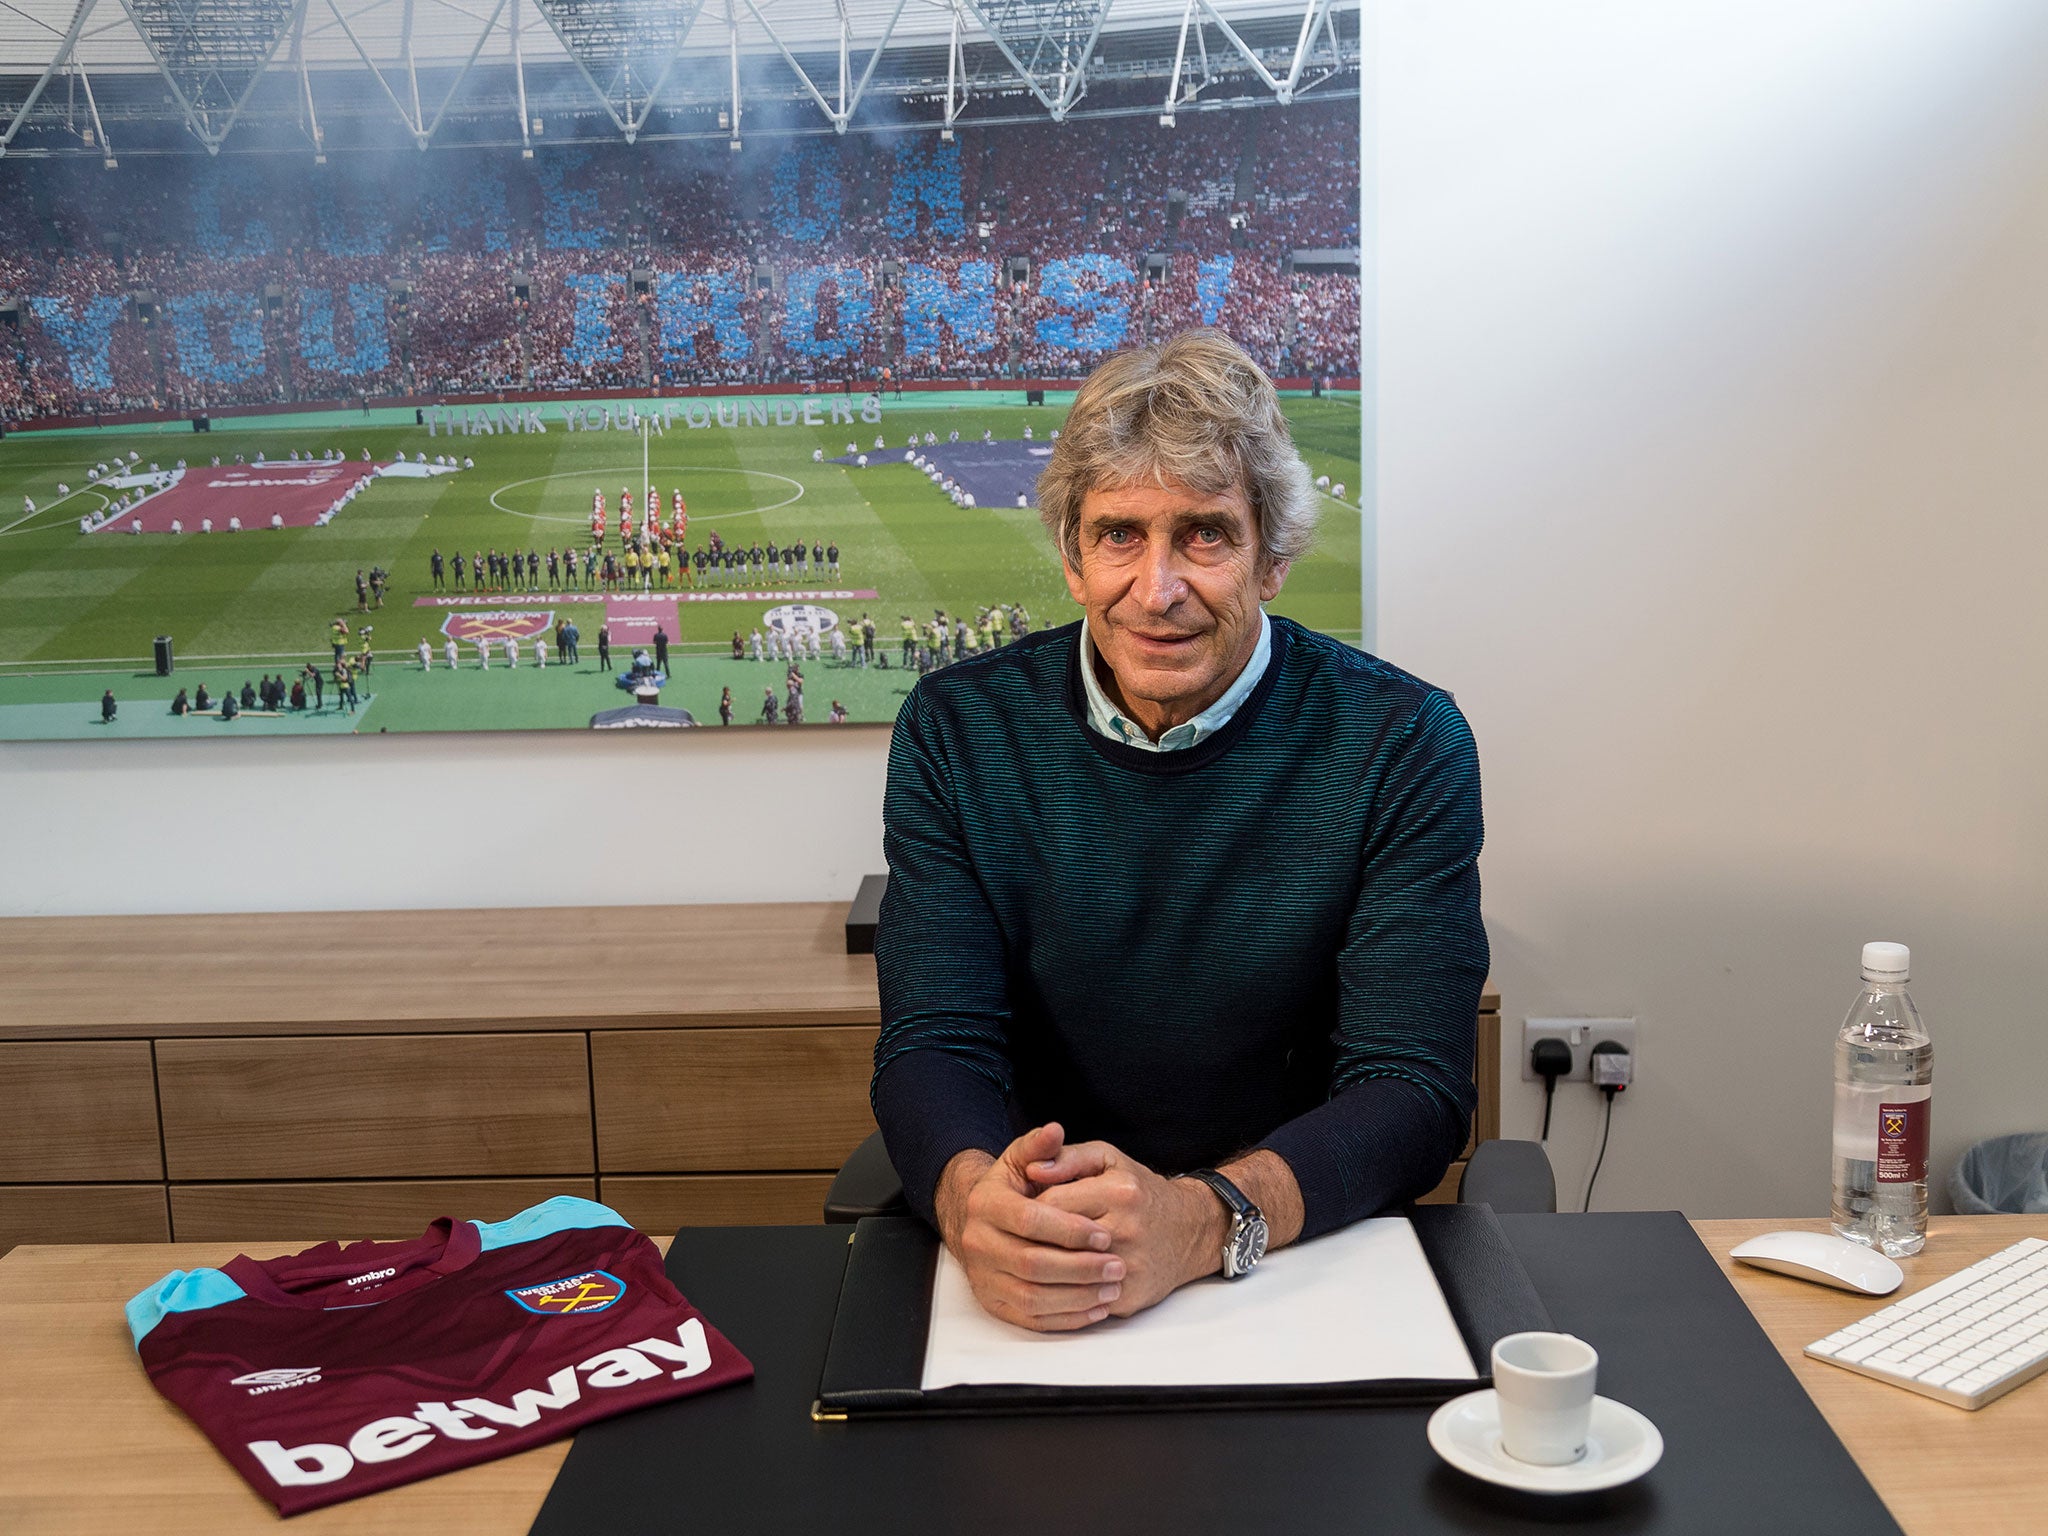 Manuel Pellegrini was confirmed on West Ham's new manager on Tuesday